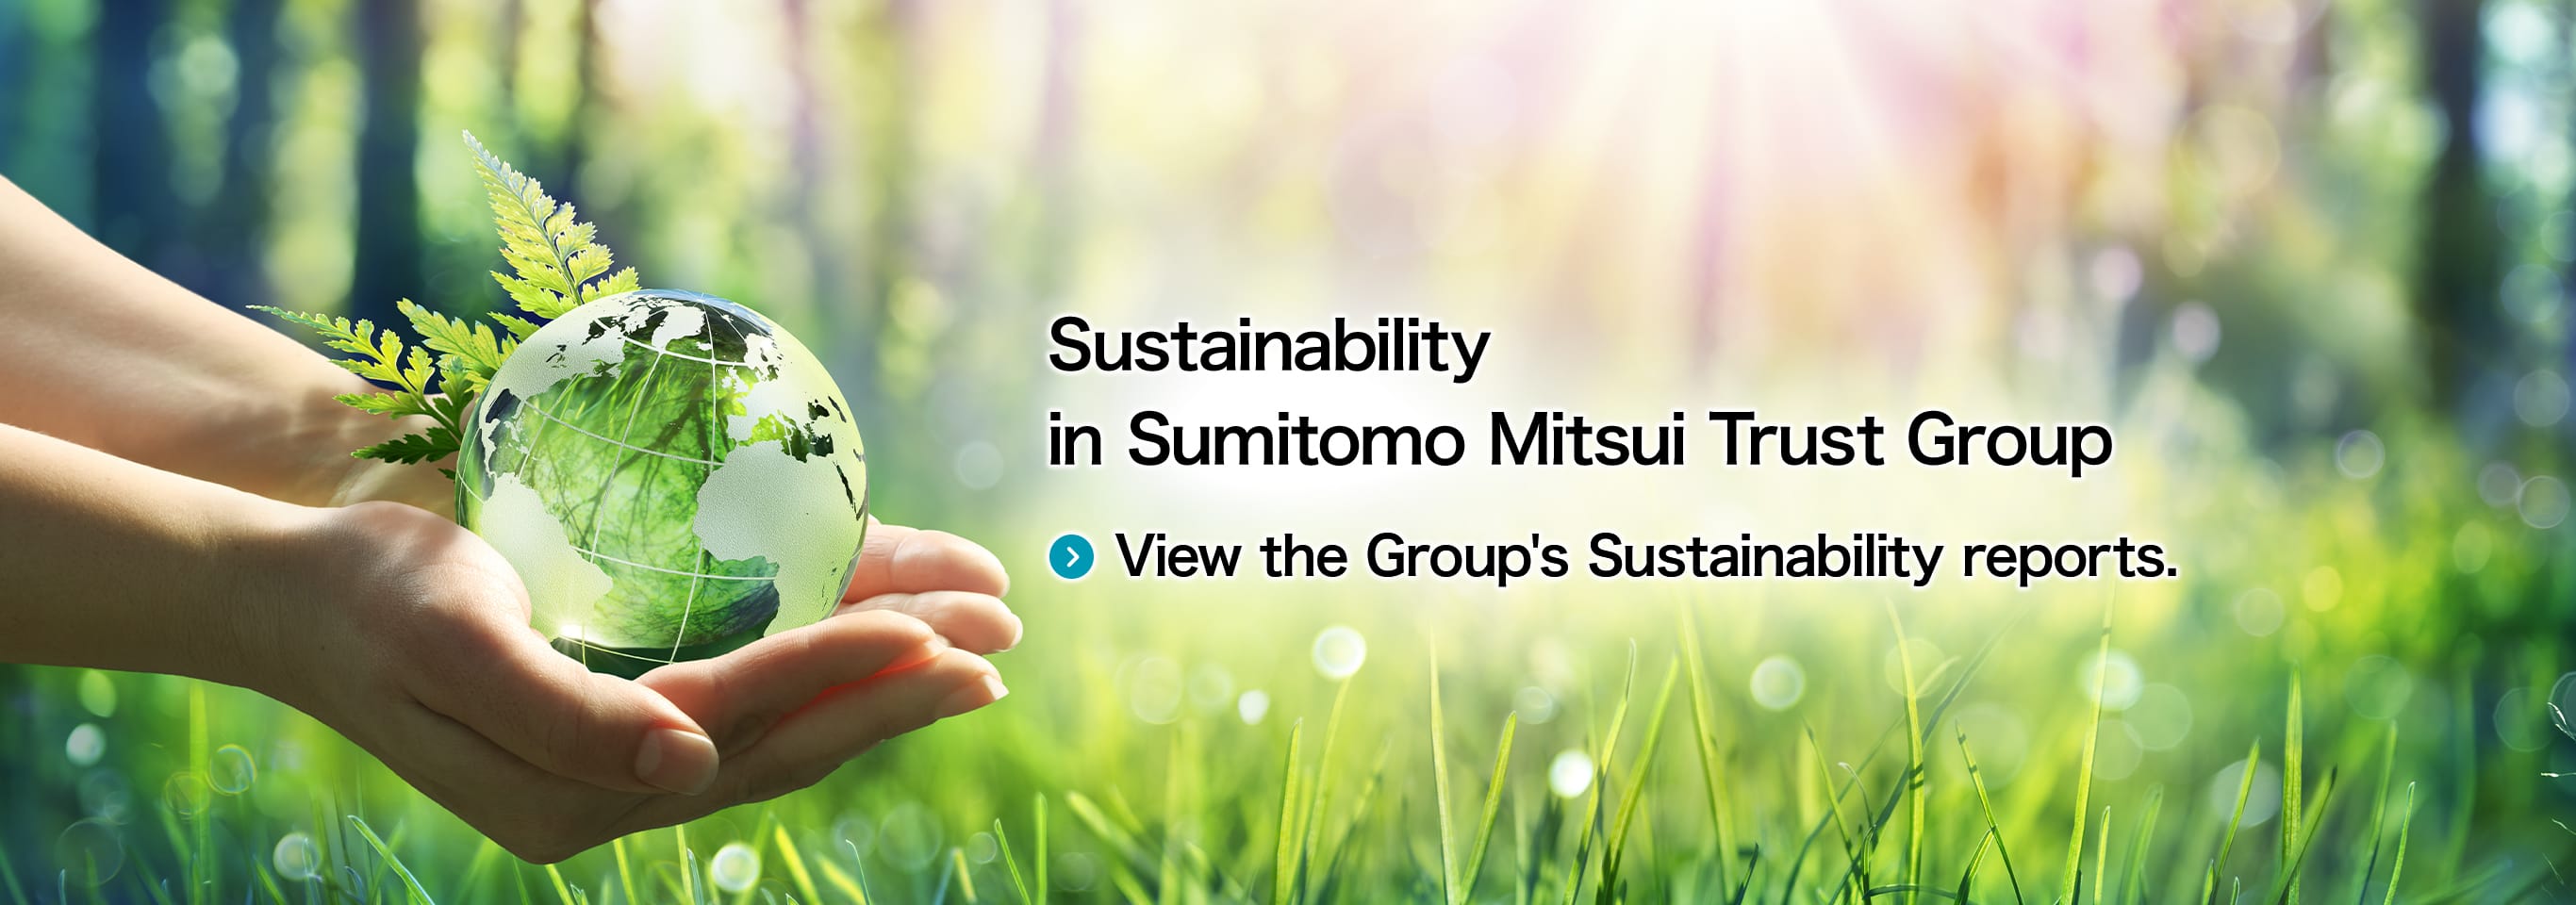 Sustainability in Sumitomo Mitsui Trust Group View the Group's Sustainability reports.